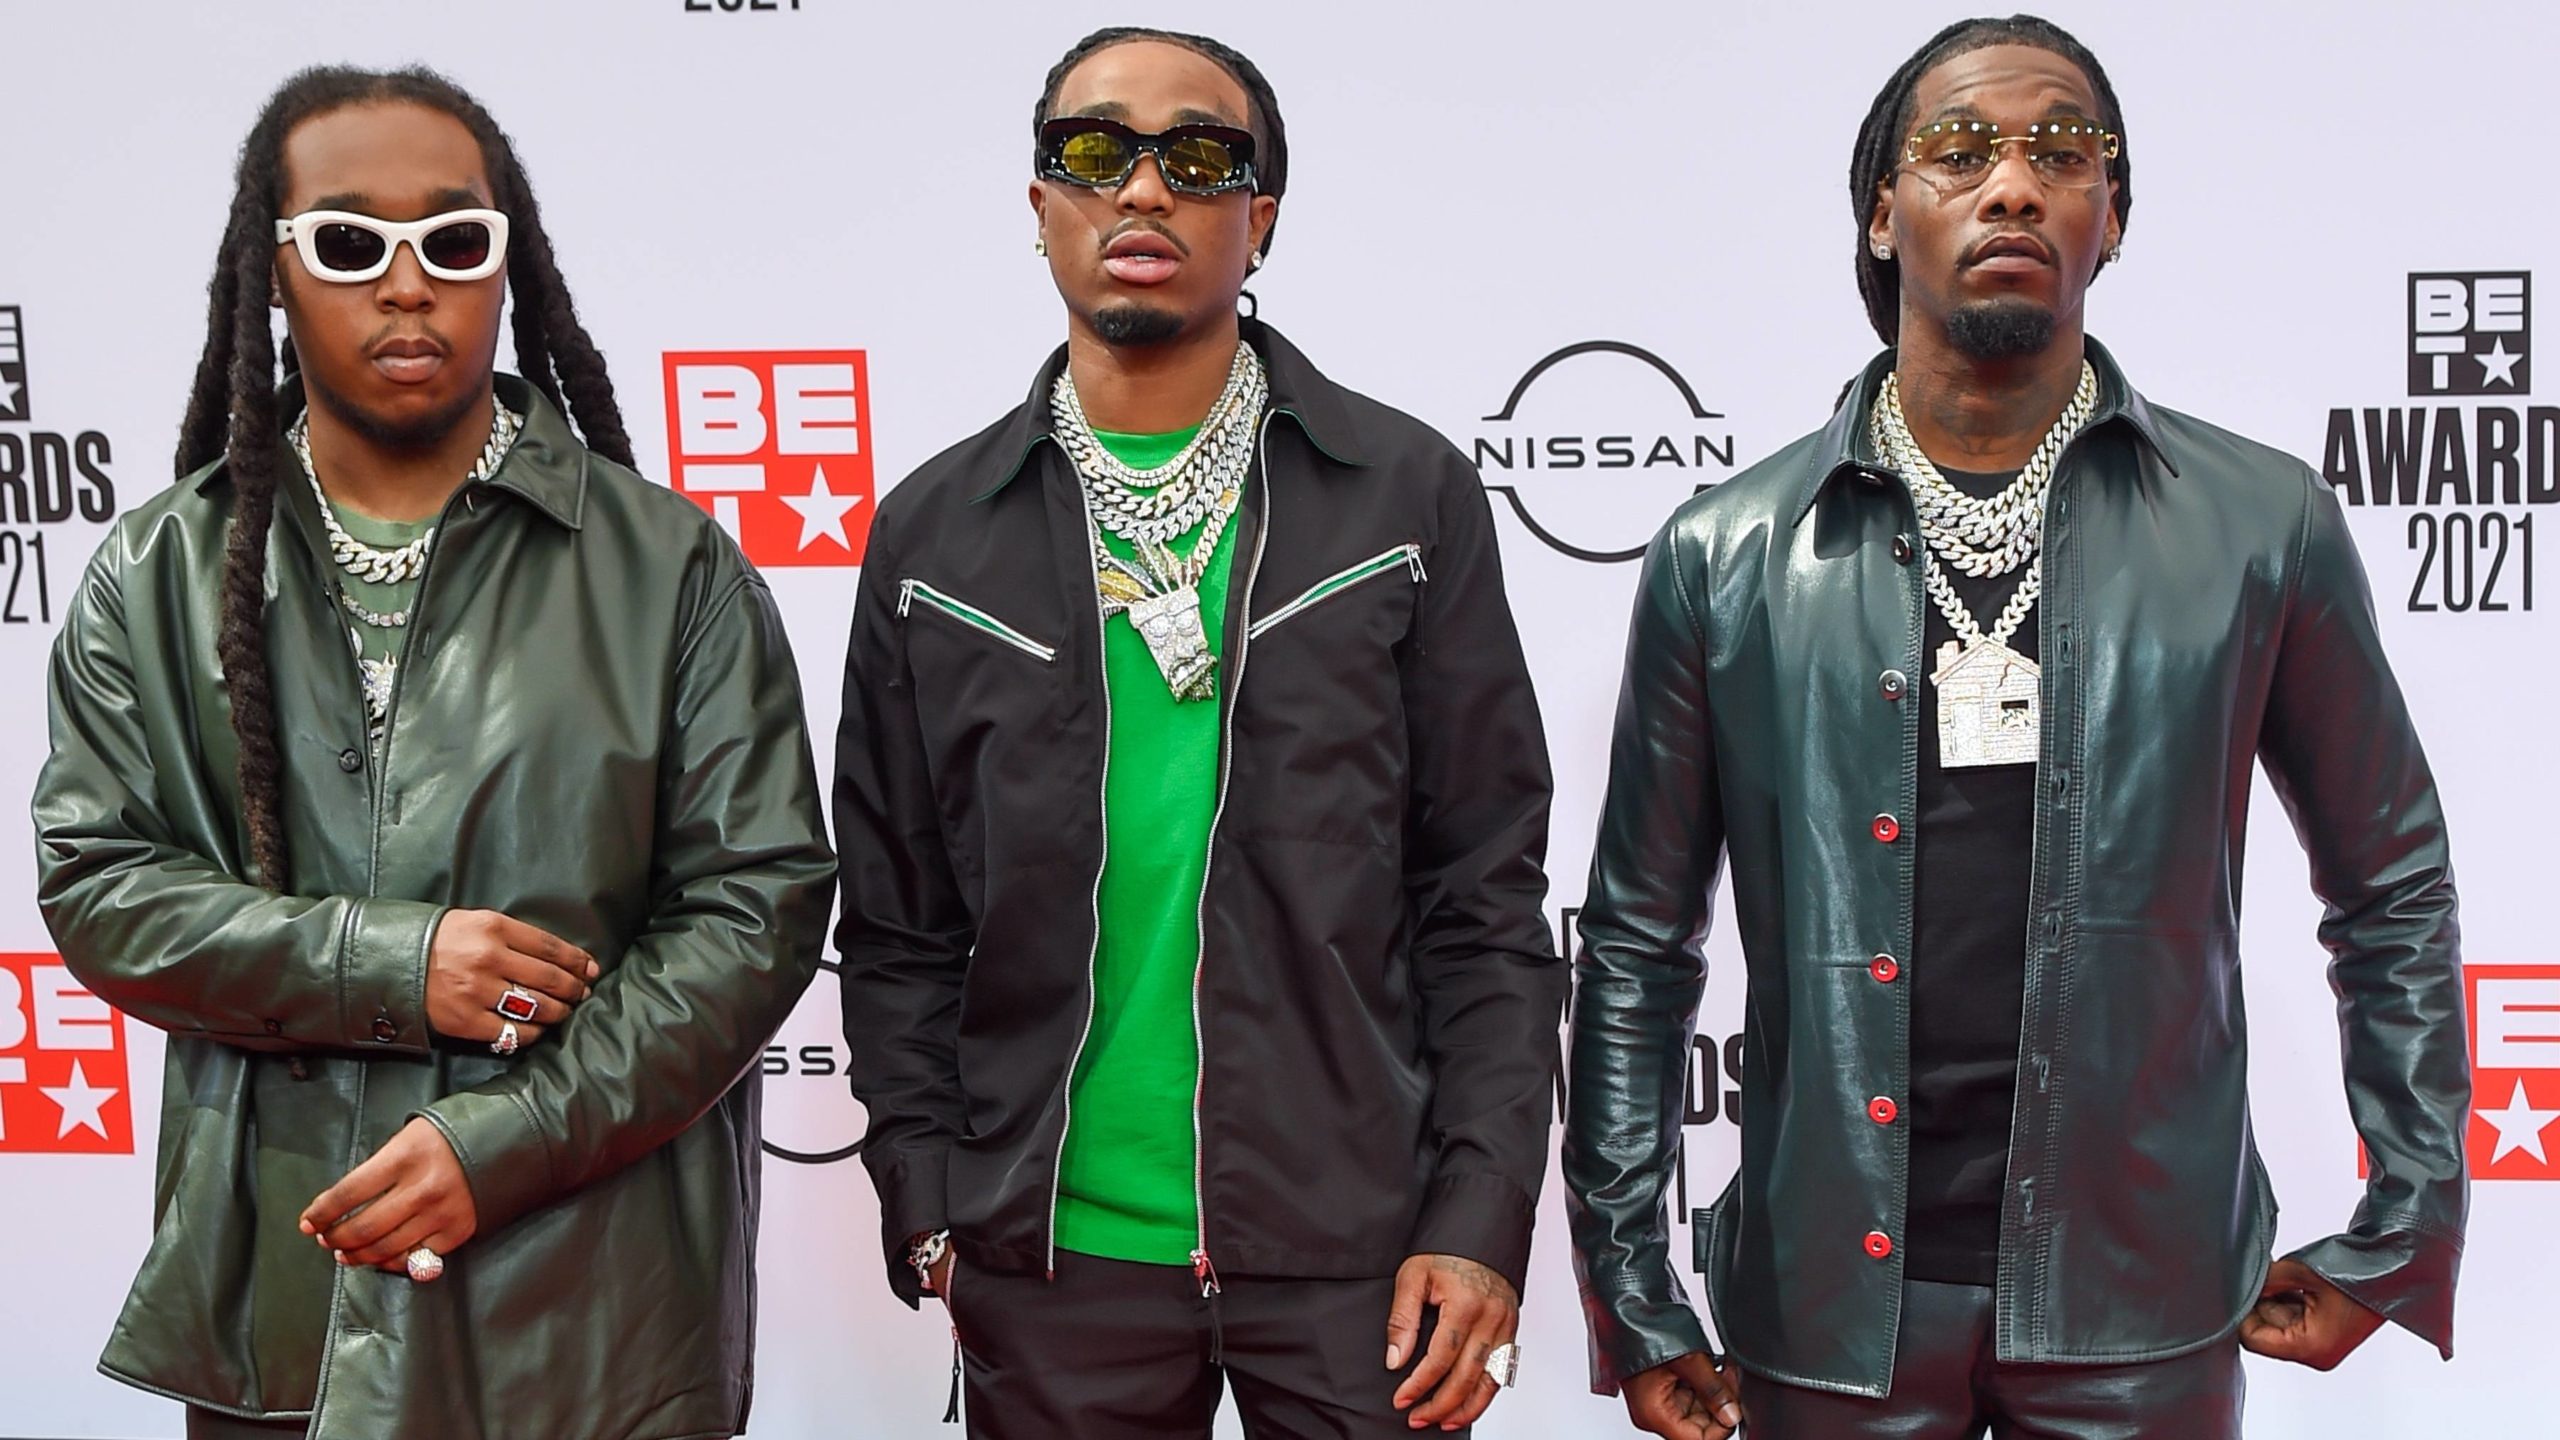 Offset And Quavo Reunited At The 2023 BET Awards To Pay Tribute To Fallen Migos Member Takeoff With Spirited Performance Of ‘Bad N Boujee’ [Video]